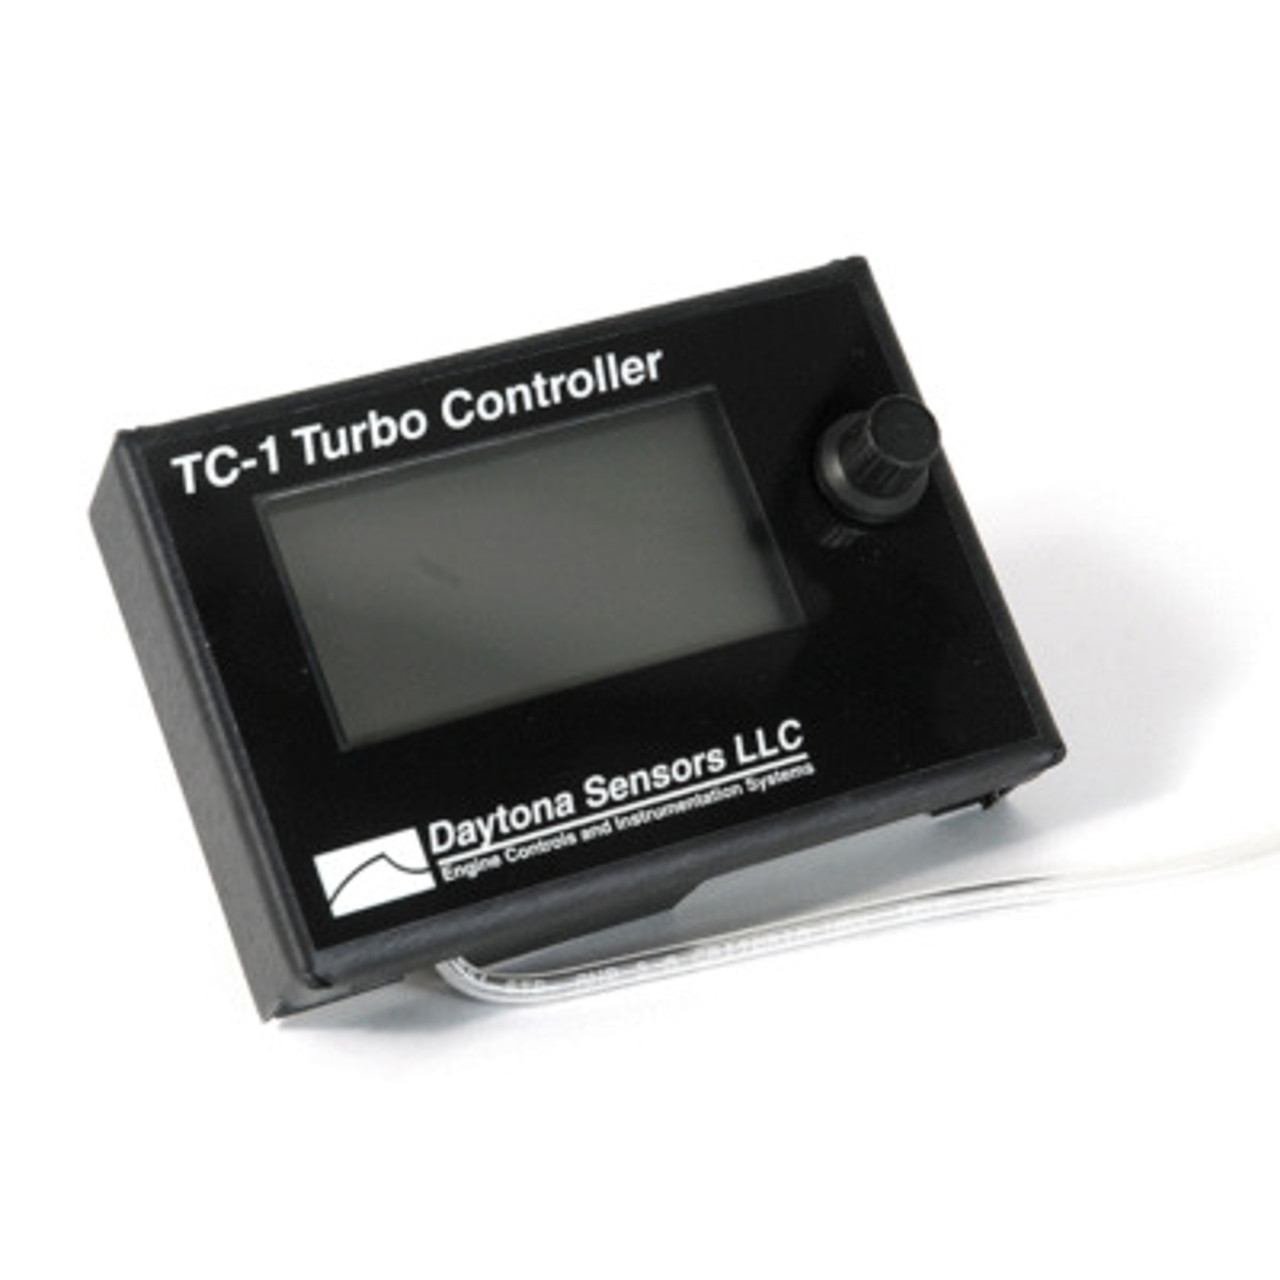 DAY118001, TC-1 Turbo Controller/ Data Logger System